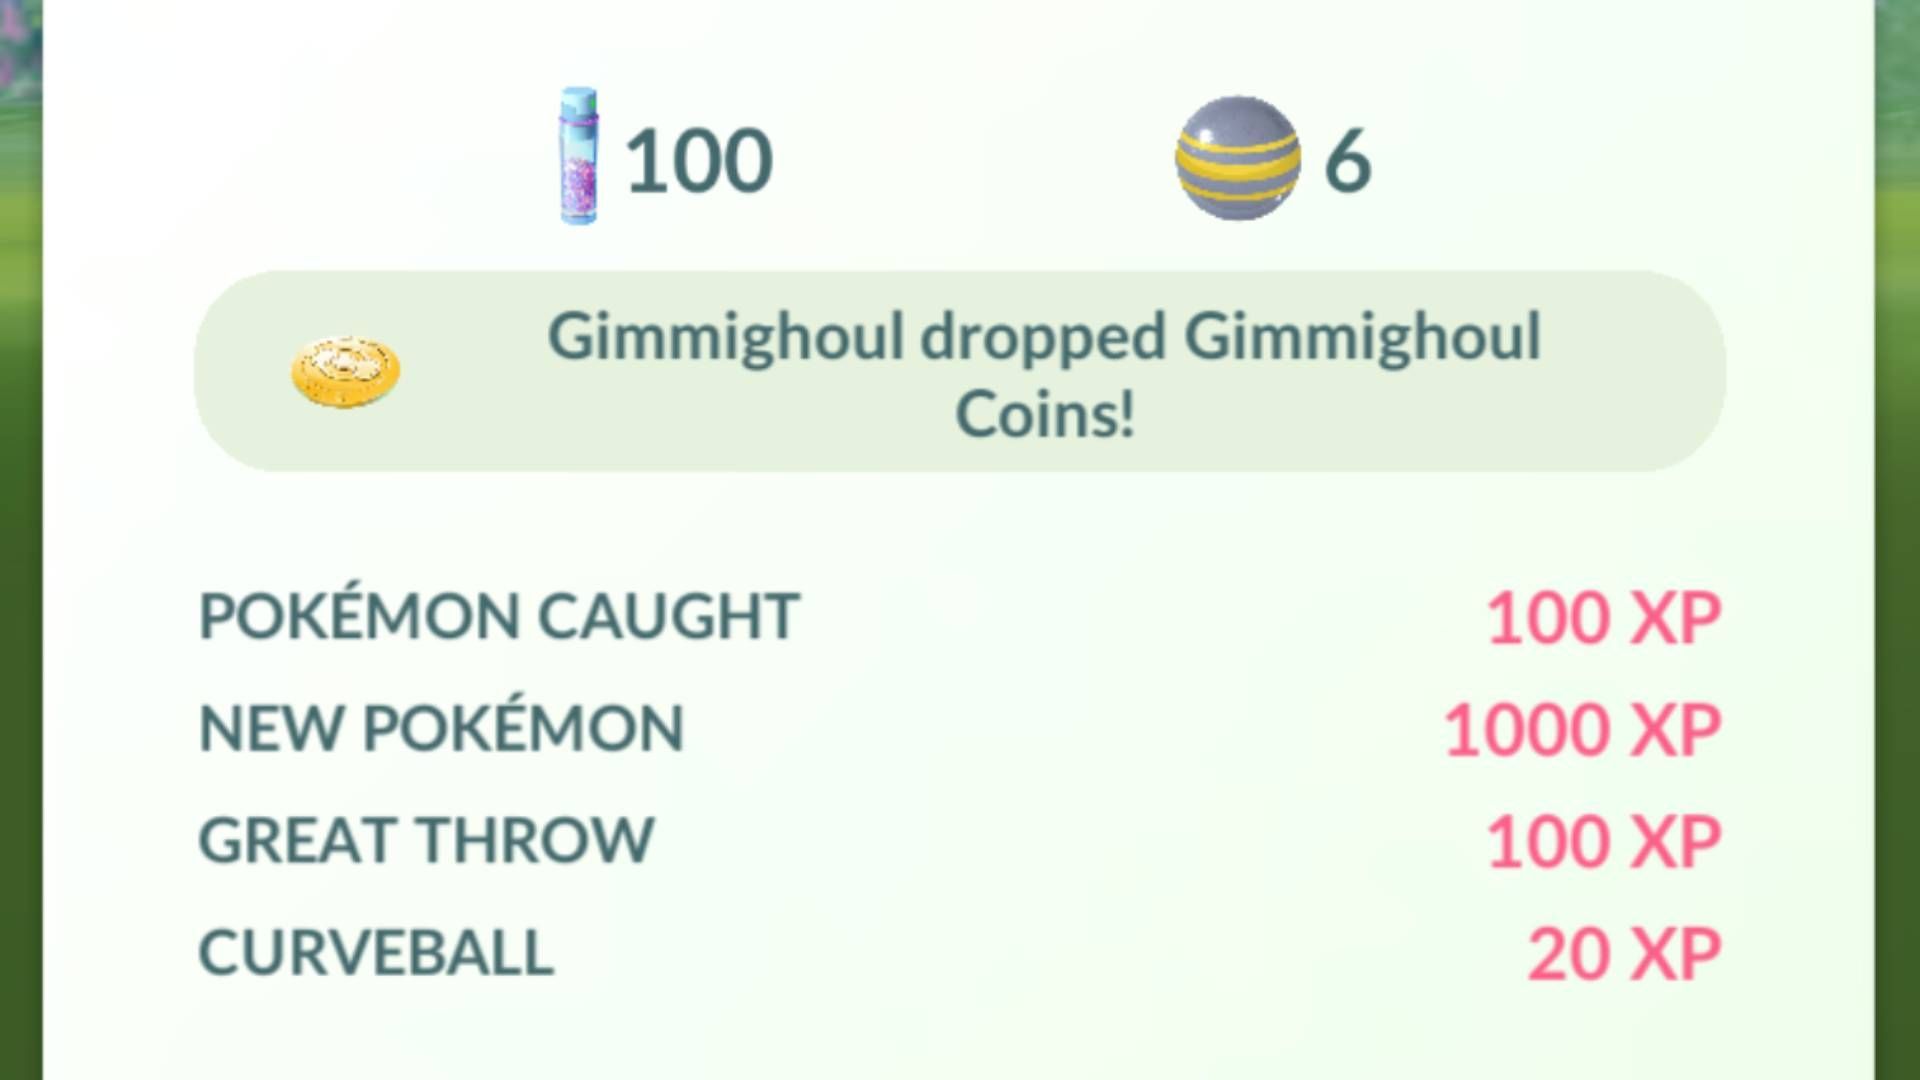 How to get Gimmighoul in Pokemon GO